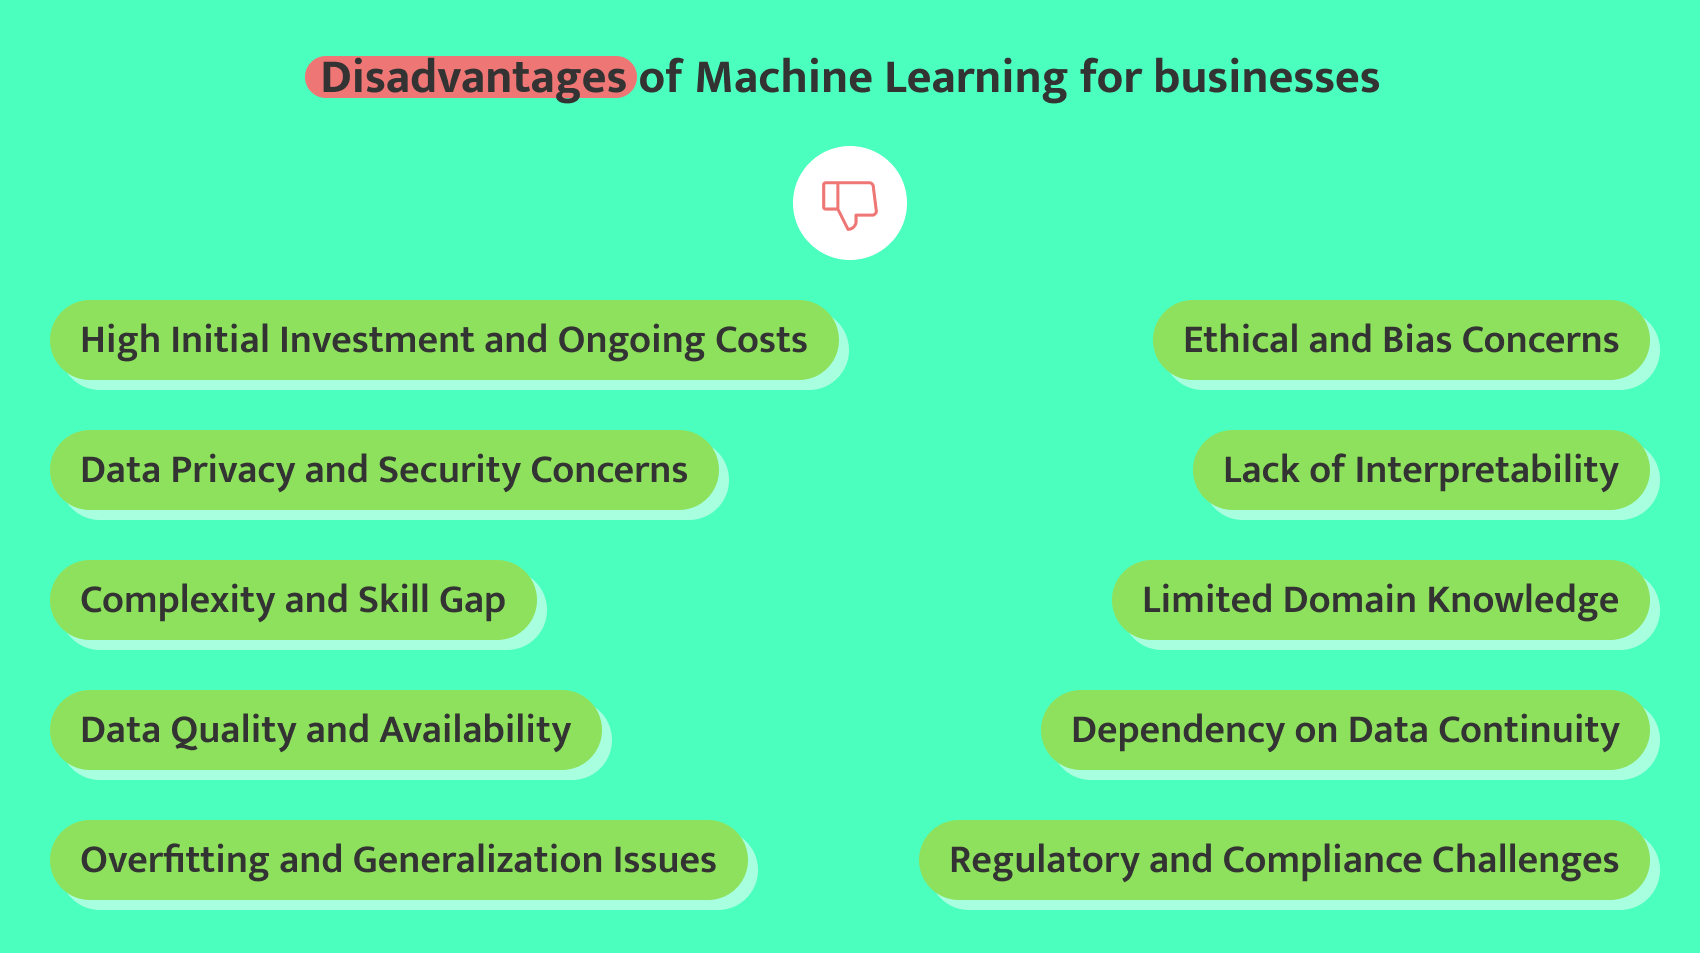 Applications of machine learning in business